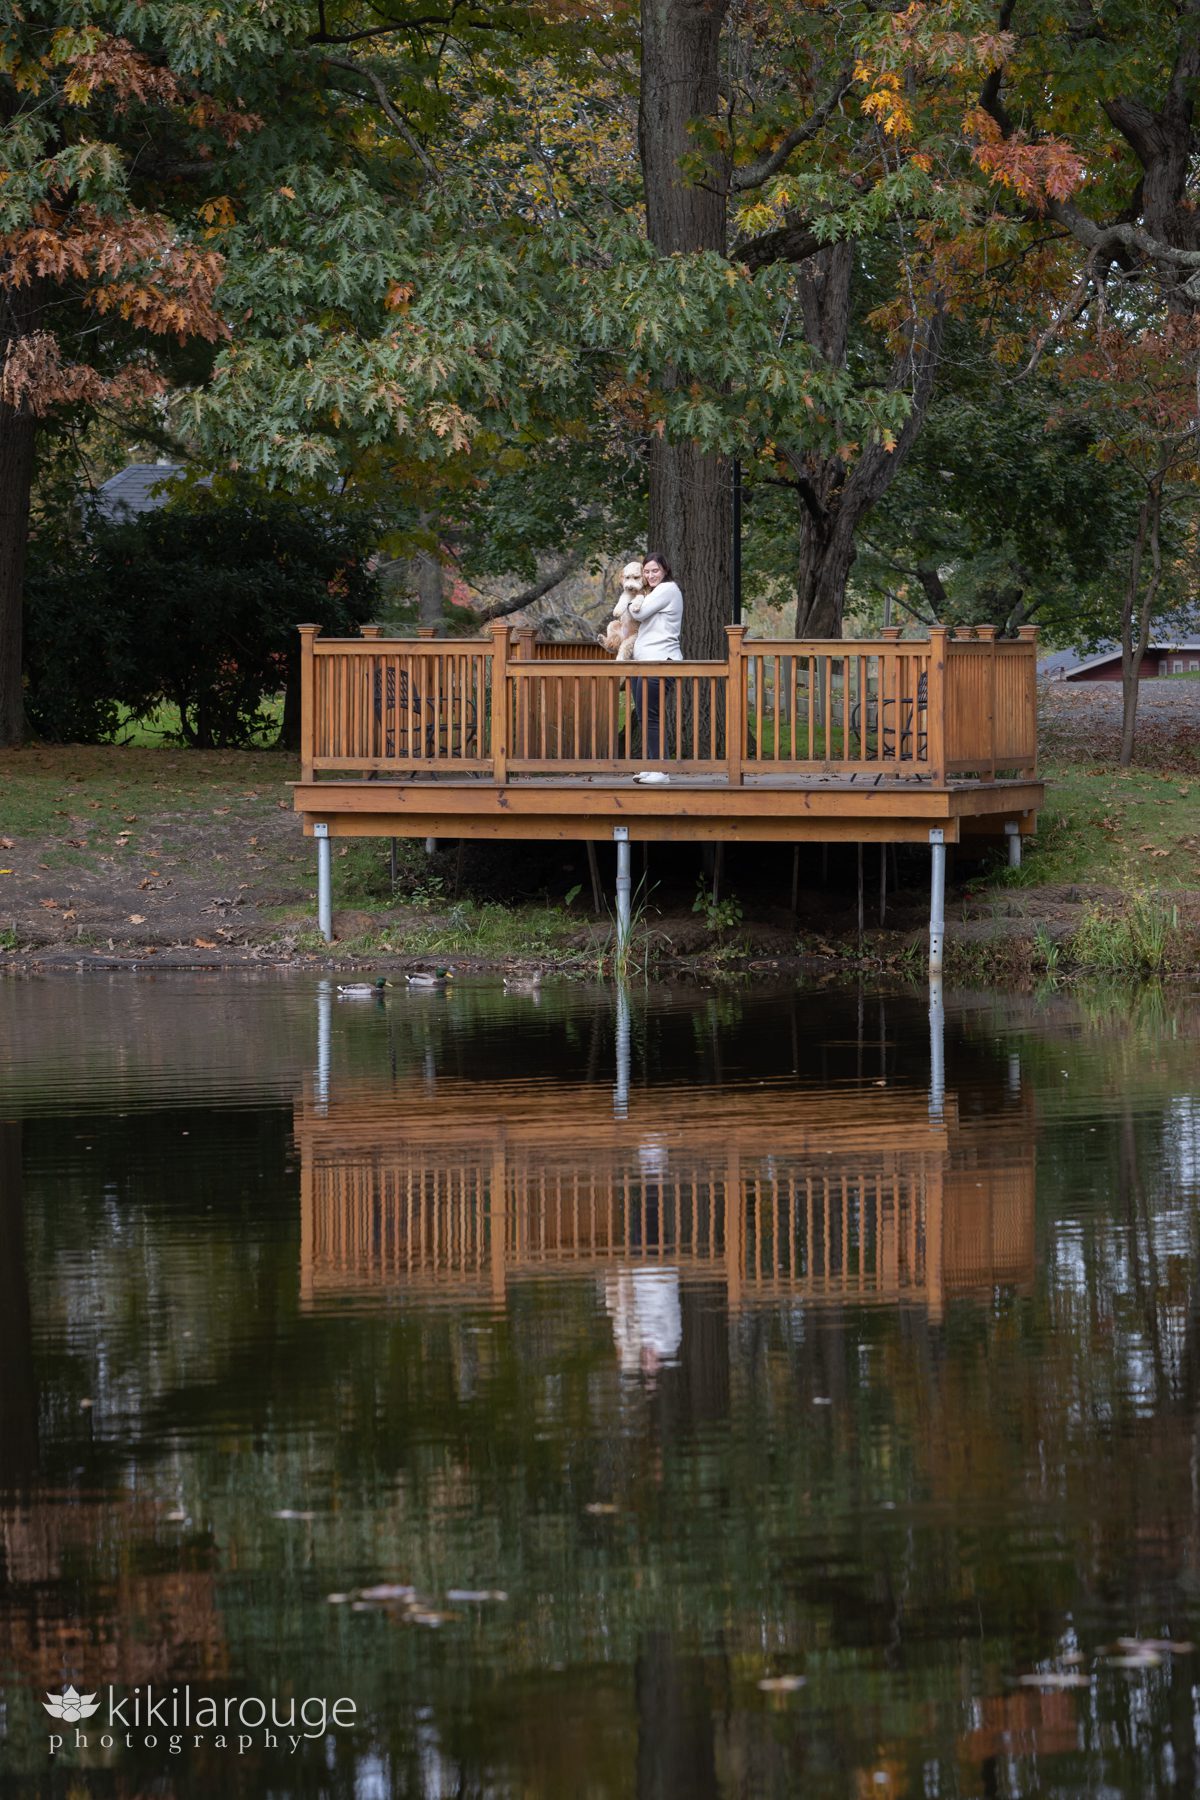 Woman holding her cute labradoodle pup on a wooden dock overlooking a pond with reflections of both